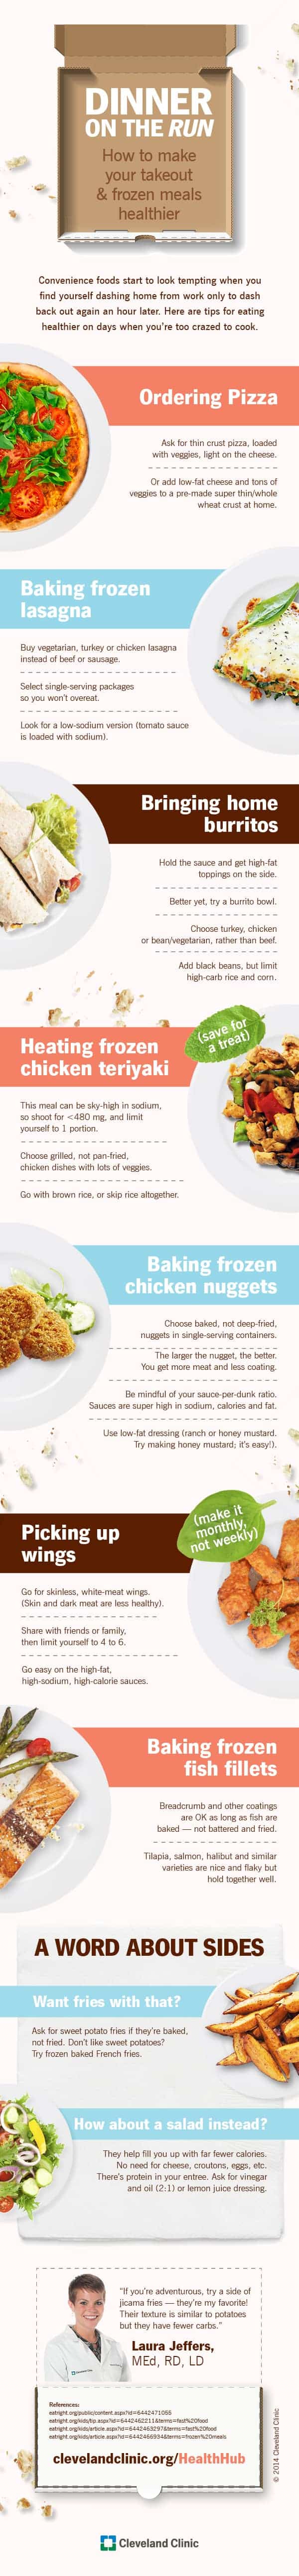 How to Make Your takeout & Frozen Meals Healthier